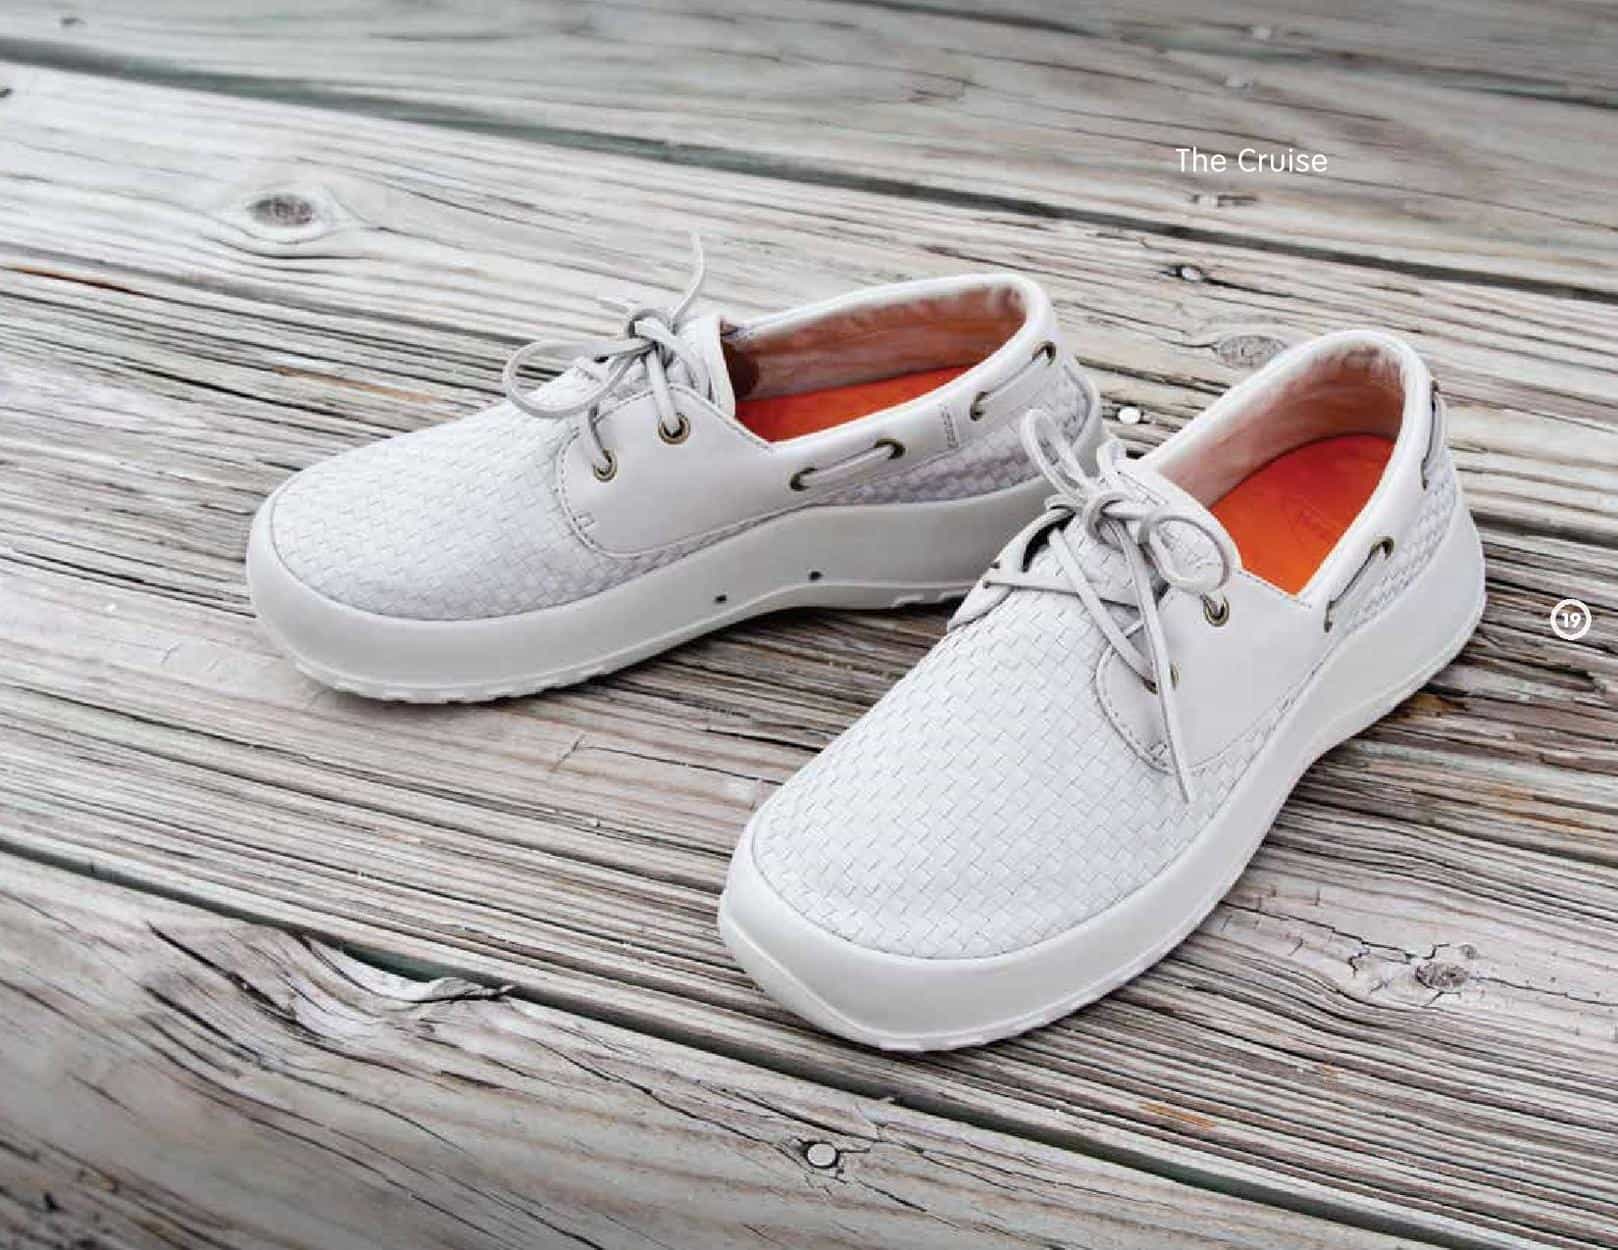 SoftScience - reinventing footwear comfort - slip-on - boat shoes - fishing shoes (4)